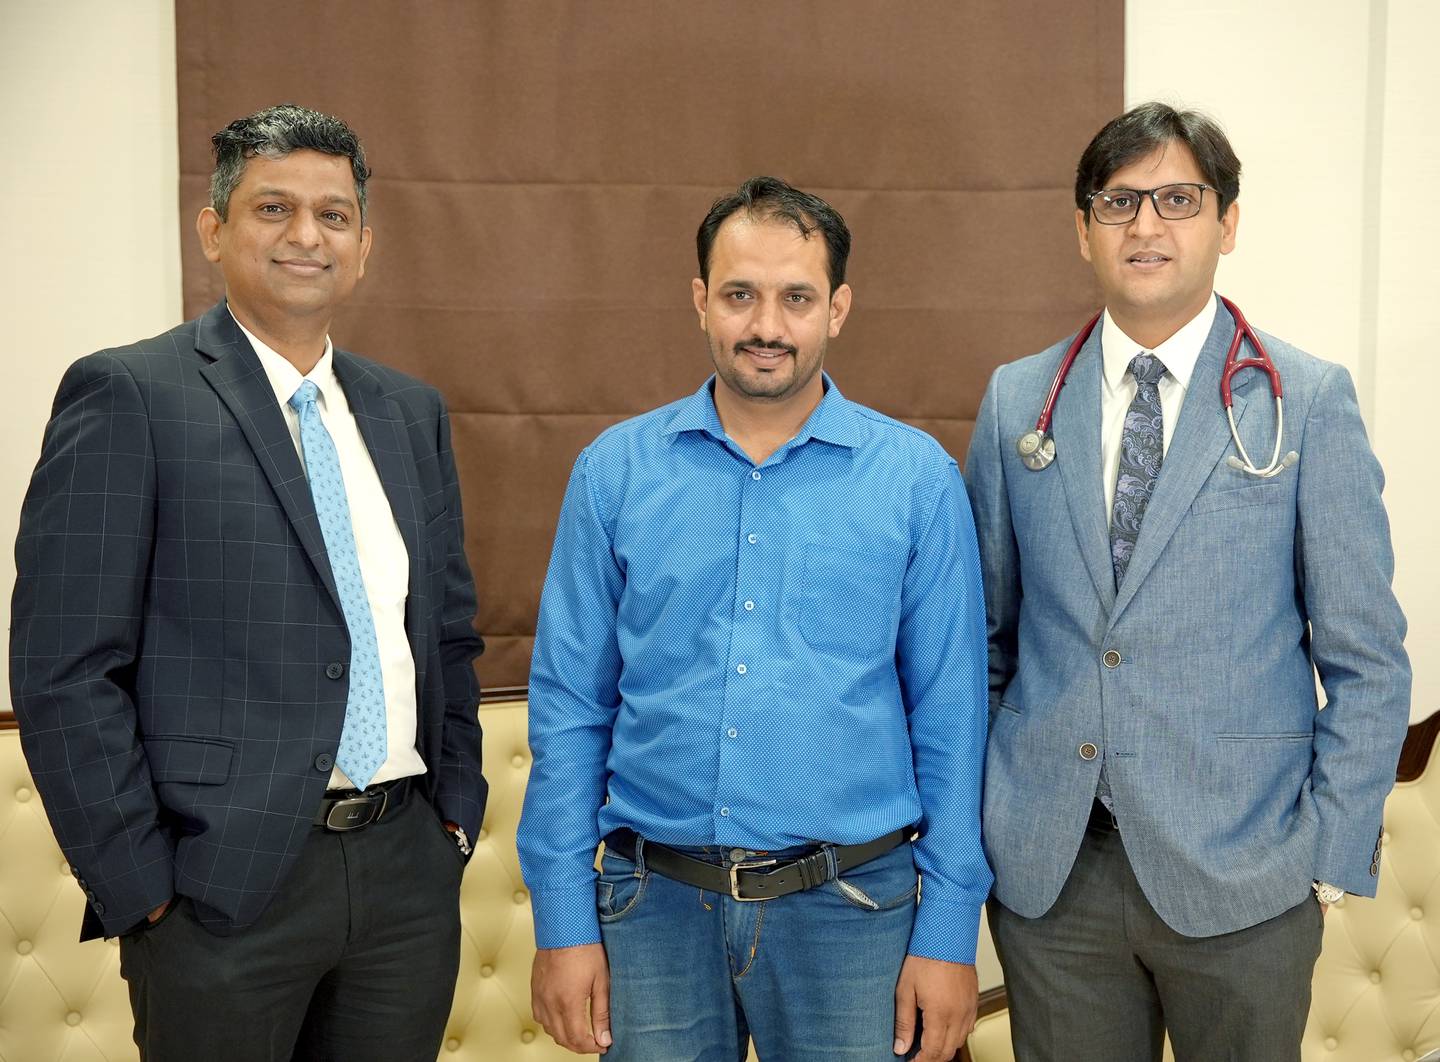 Mian Khan, centre, with Dr Vaibhav Gorde, left, and Dr Rahul Chaudhary. Photo: Burjeel Hospital